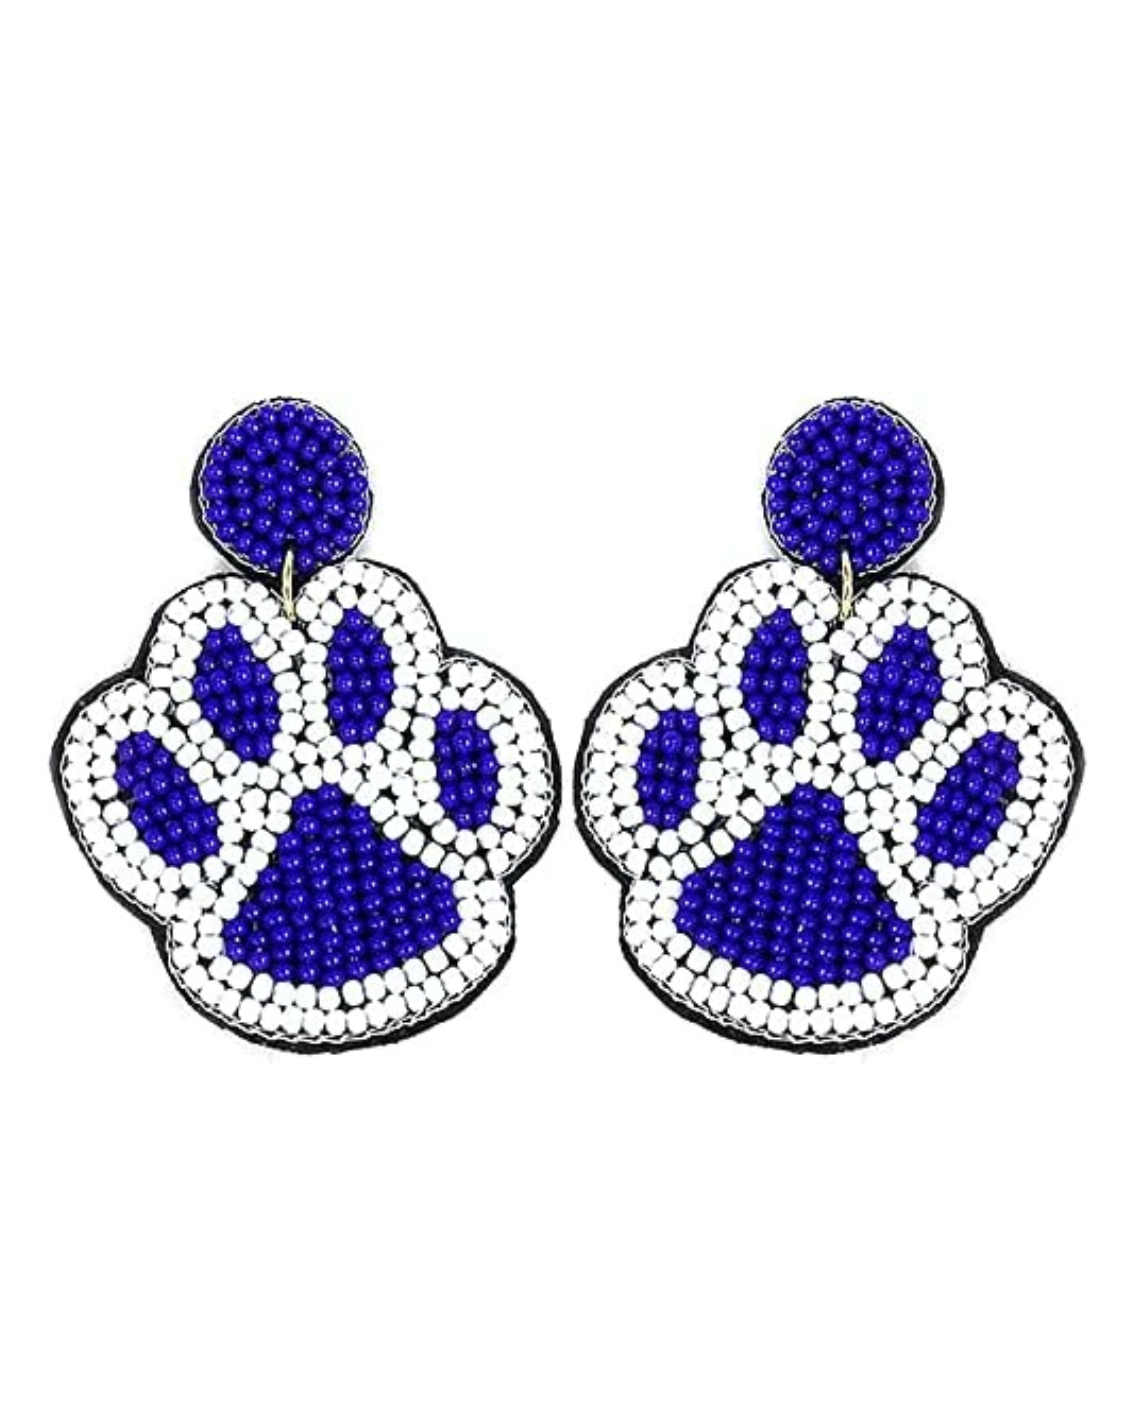 Middlebury College Panther Paw Earrings